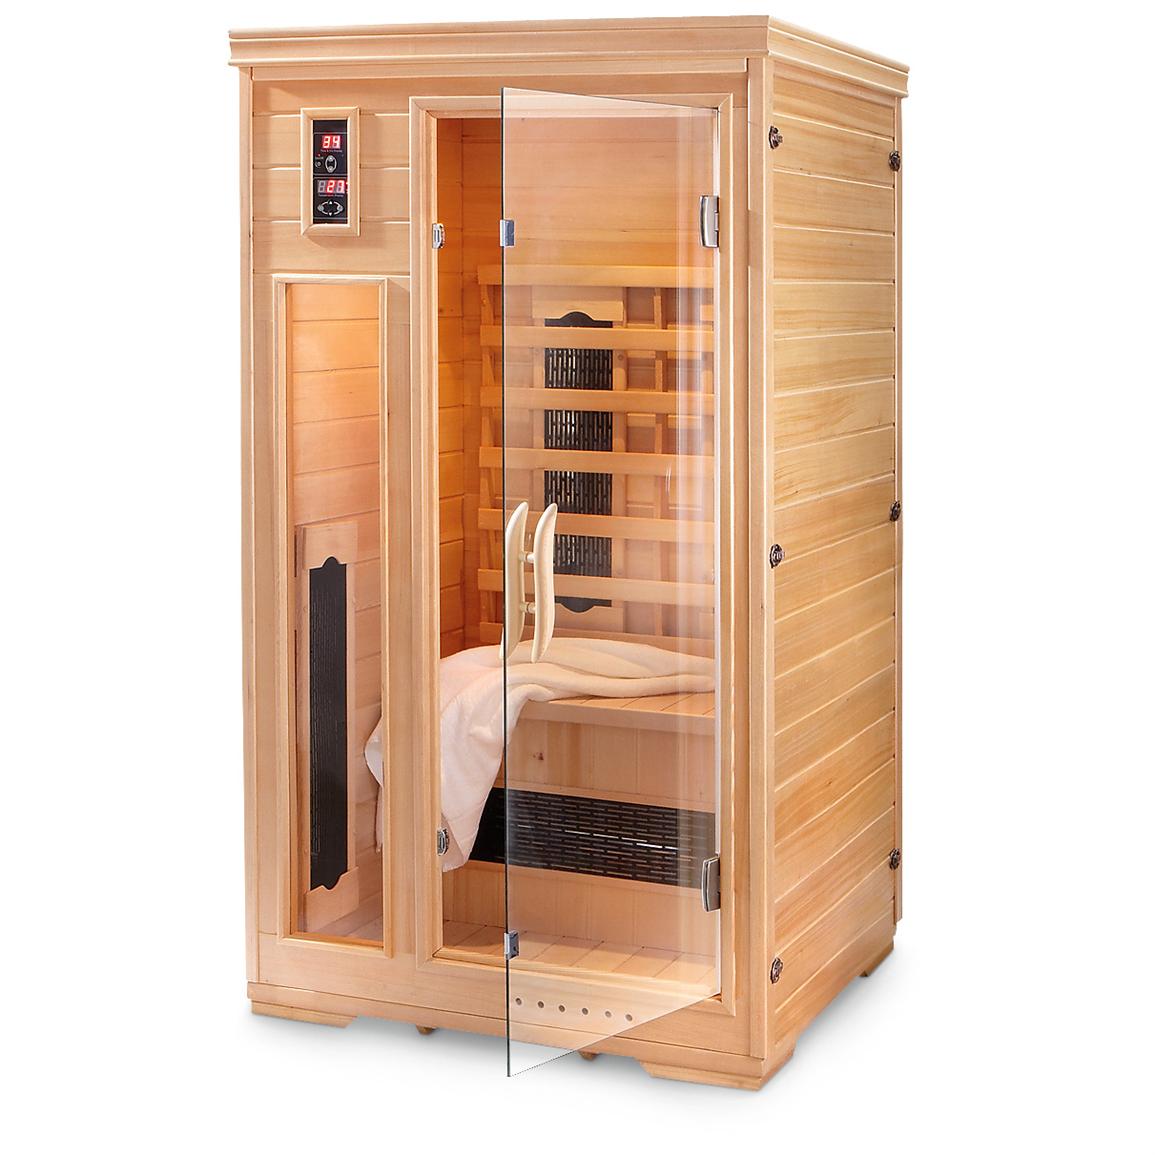 sauna infrared person personal spa sportsmansguide saunas single spas cabin health relaxing brown bathroom technology care fitness steam braces getaway